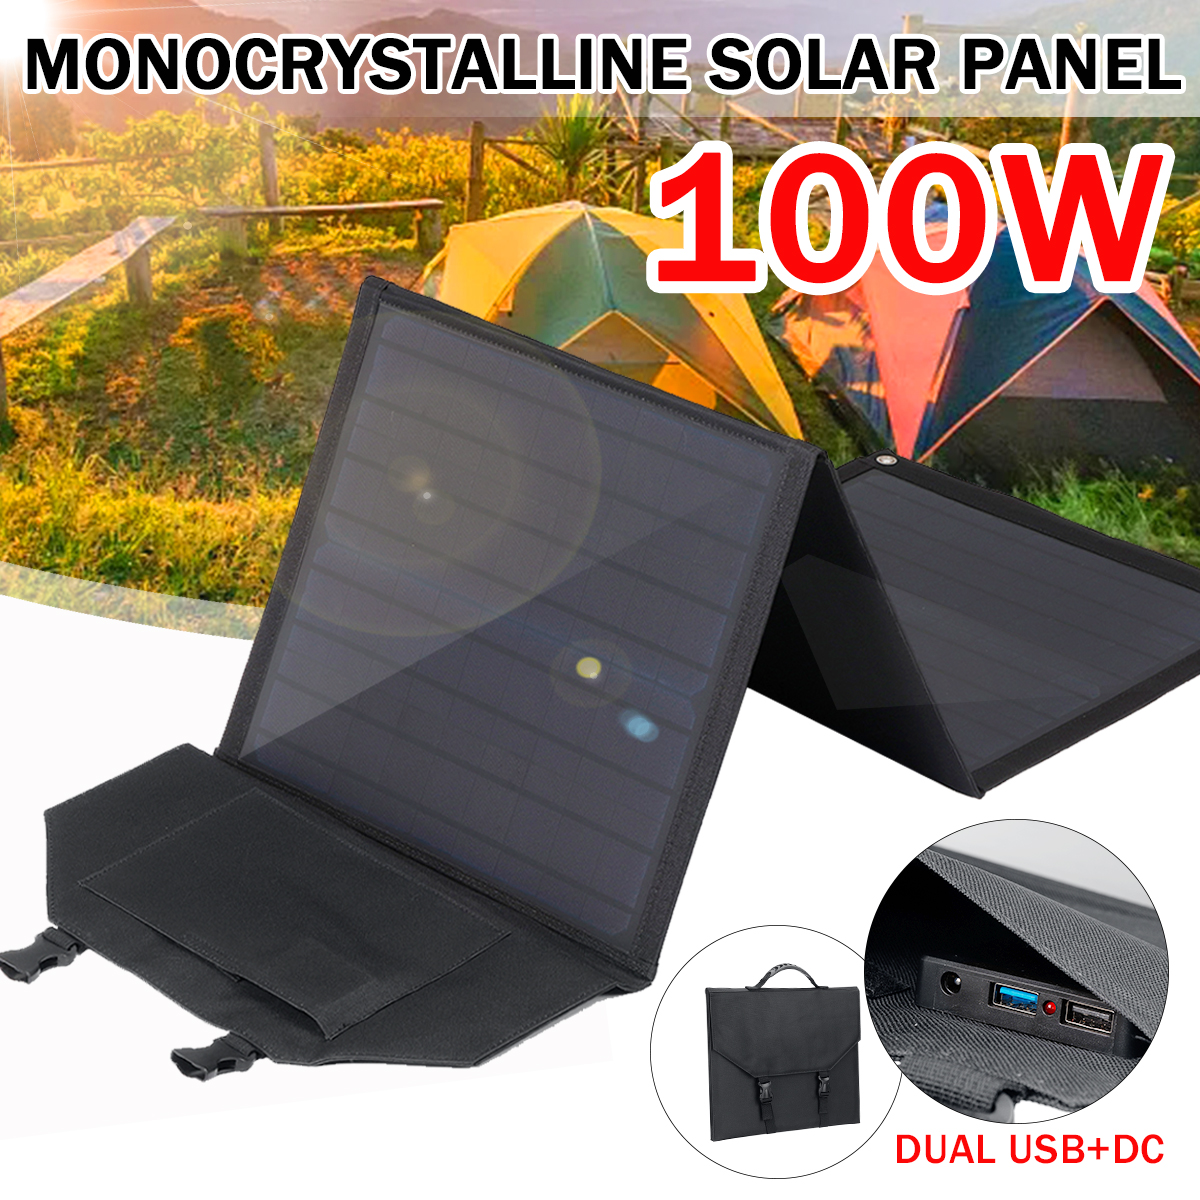 60W-USB-Solar-Panel-Folding-Monocrystalline-PET-Power-Charger--for-Phone-RV-Car-MP3-PAD-Charger-Outd-1905385-2